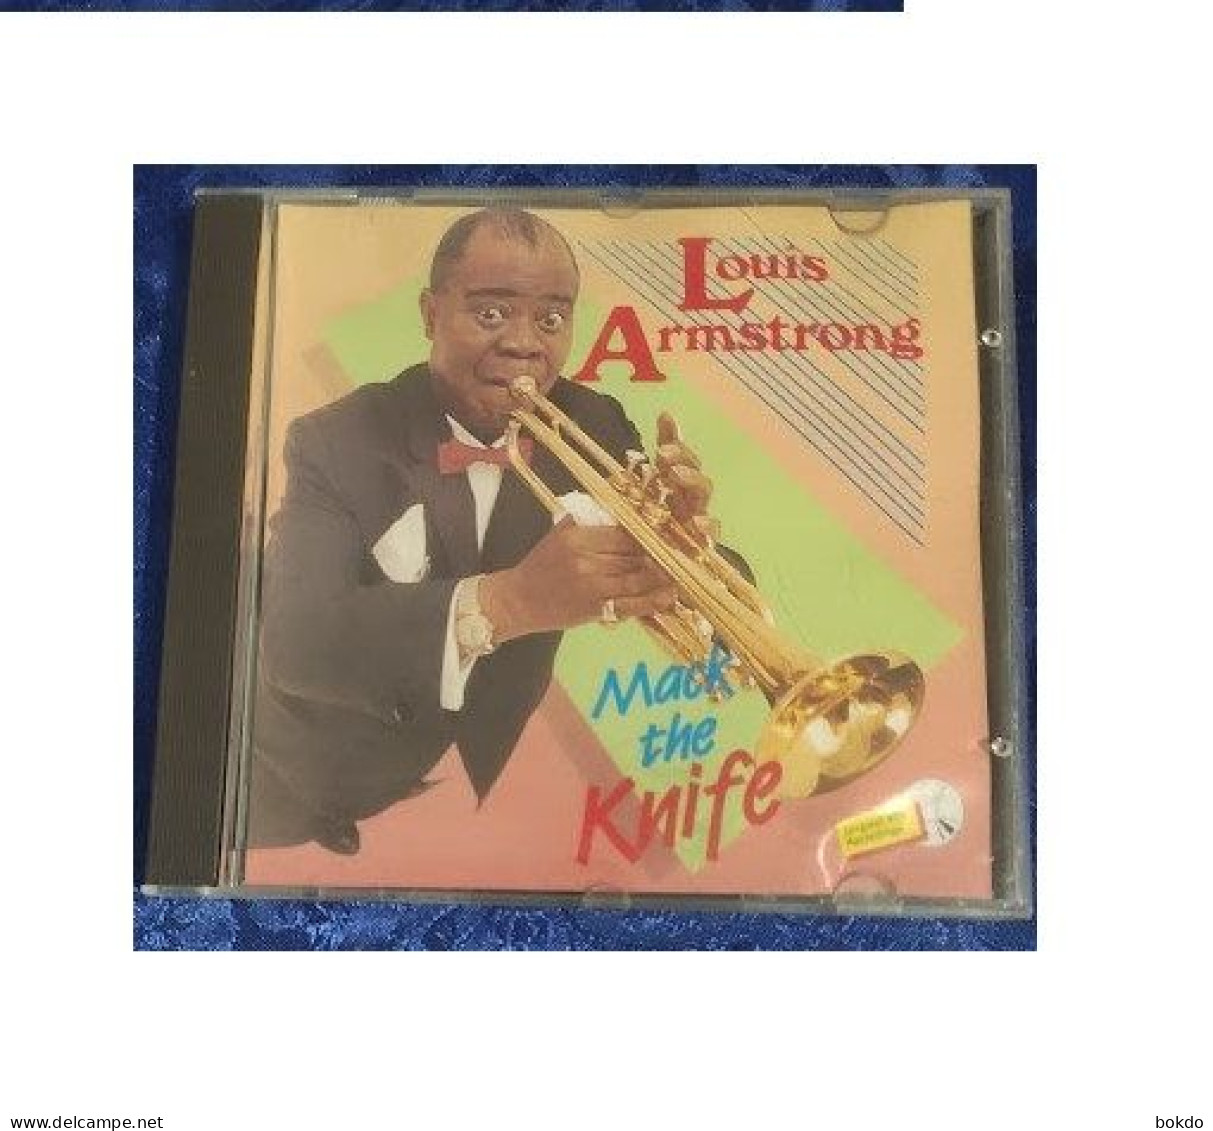 Louis Aremstrong - Mack The Knife - Jazz